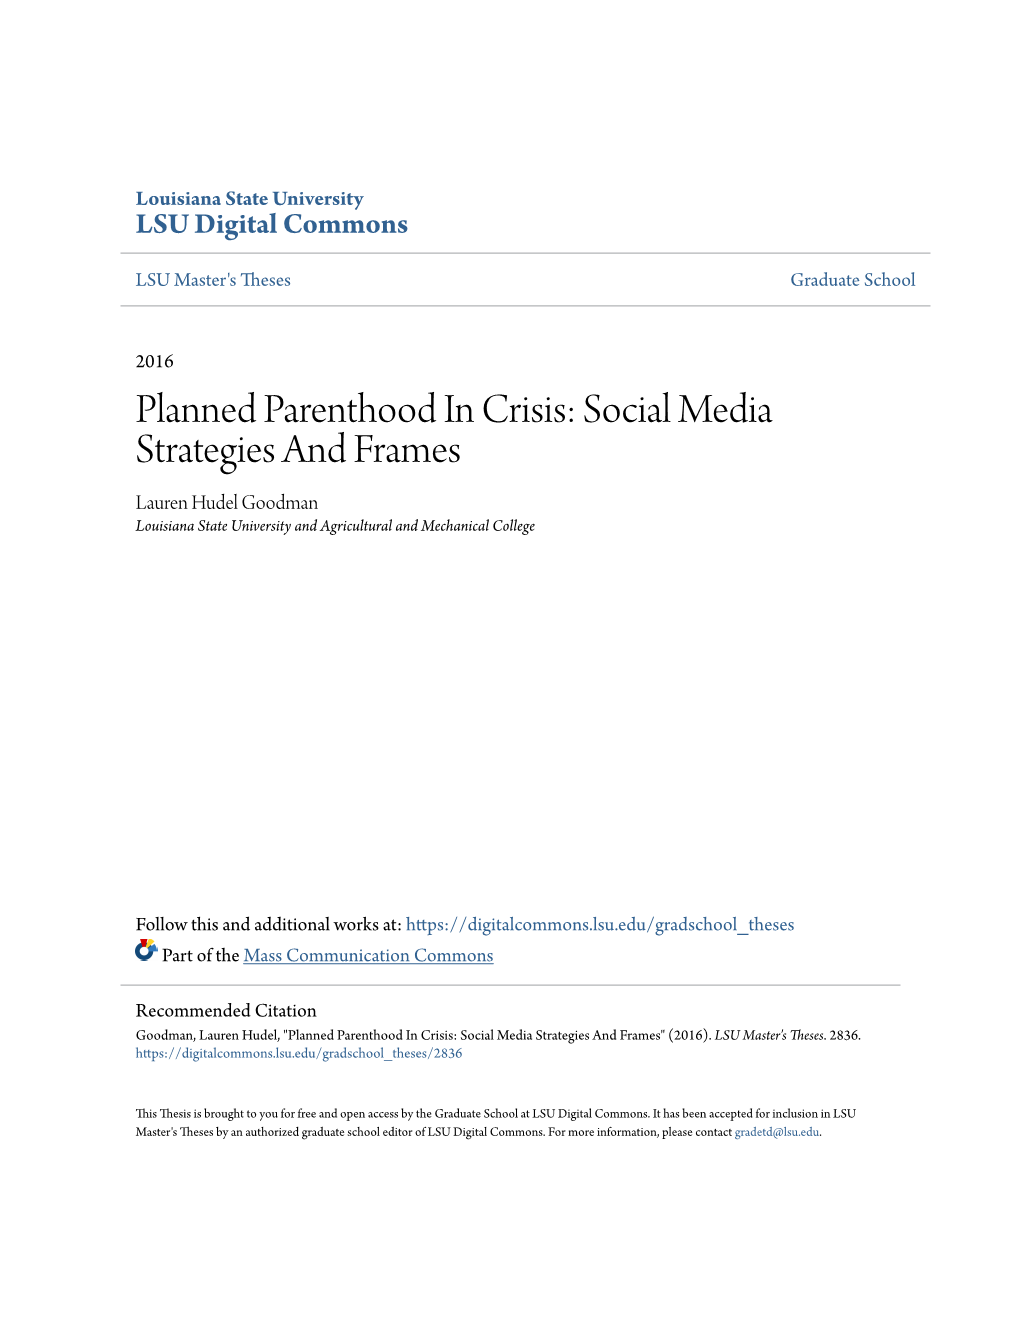 Planned Parenthood in Crisis: Social Media Strategies and Frames Lauren Hudel Goodman Louisiana State University and Agricultural and Mechanical College